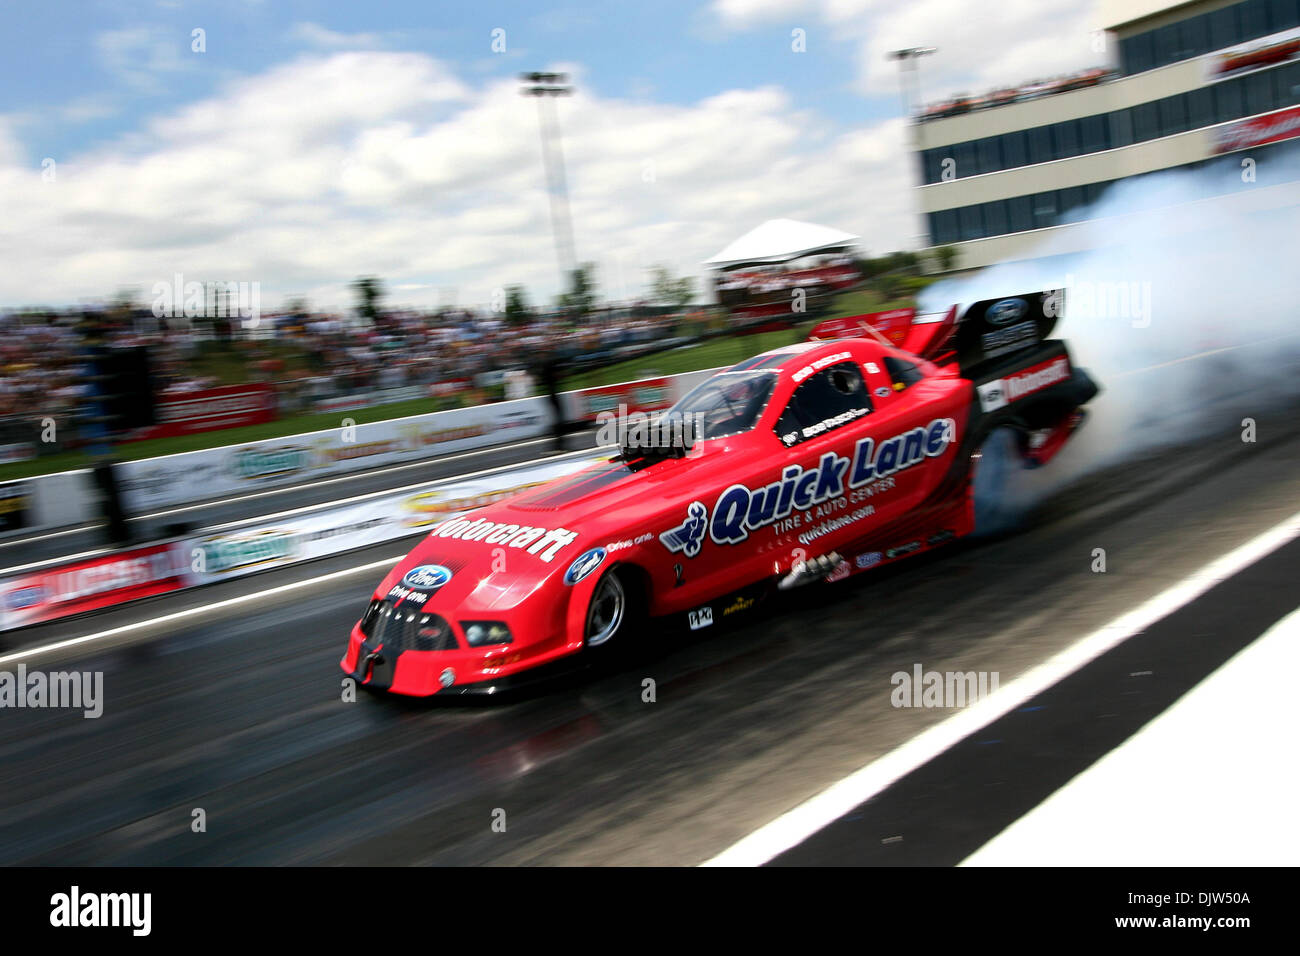 Bob Tasca III smokes his tires during the second day of competition at the NHRA O'Reilly Summer Nationals held at Heartland Park, Topeka, KS. (Credit Image: © Jacob Paulsen/Southcreek Global/ZUMApress.com) Stock Photo